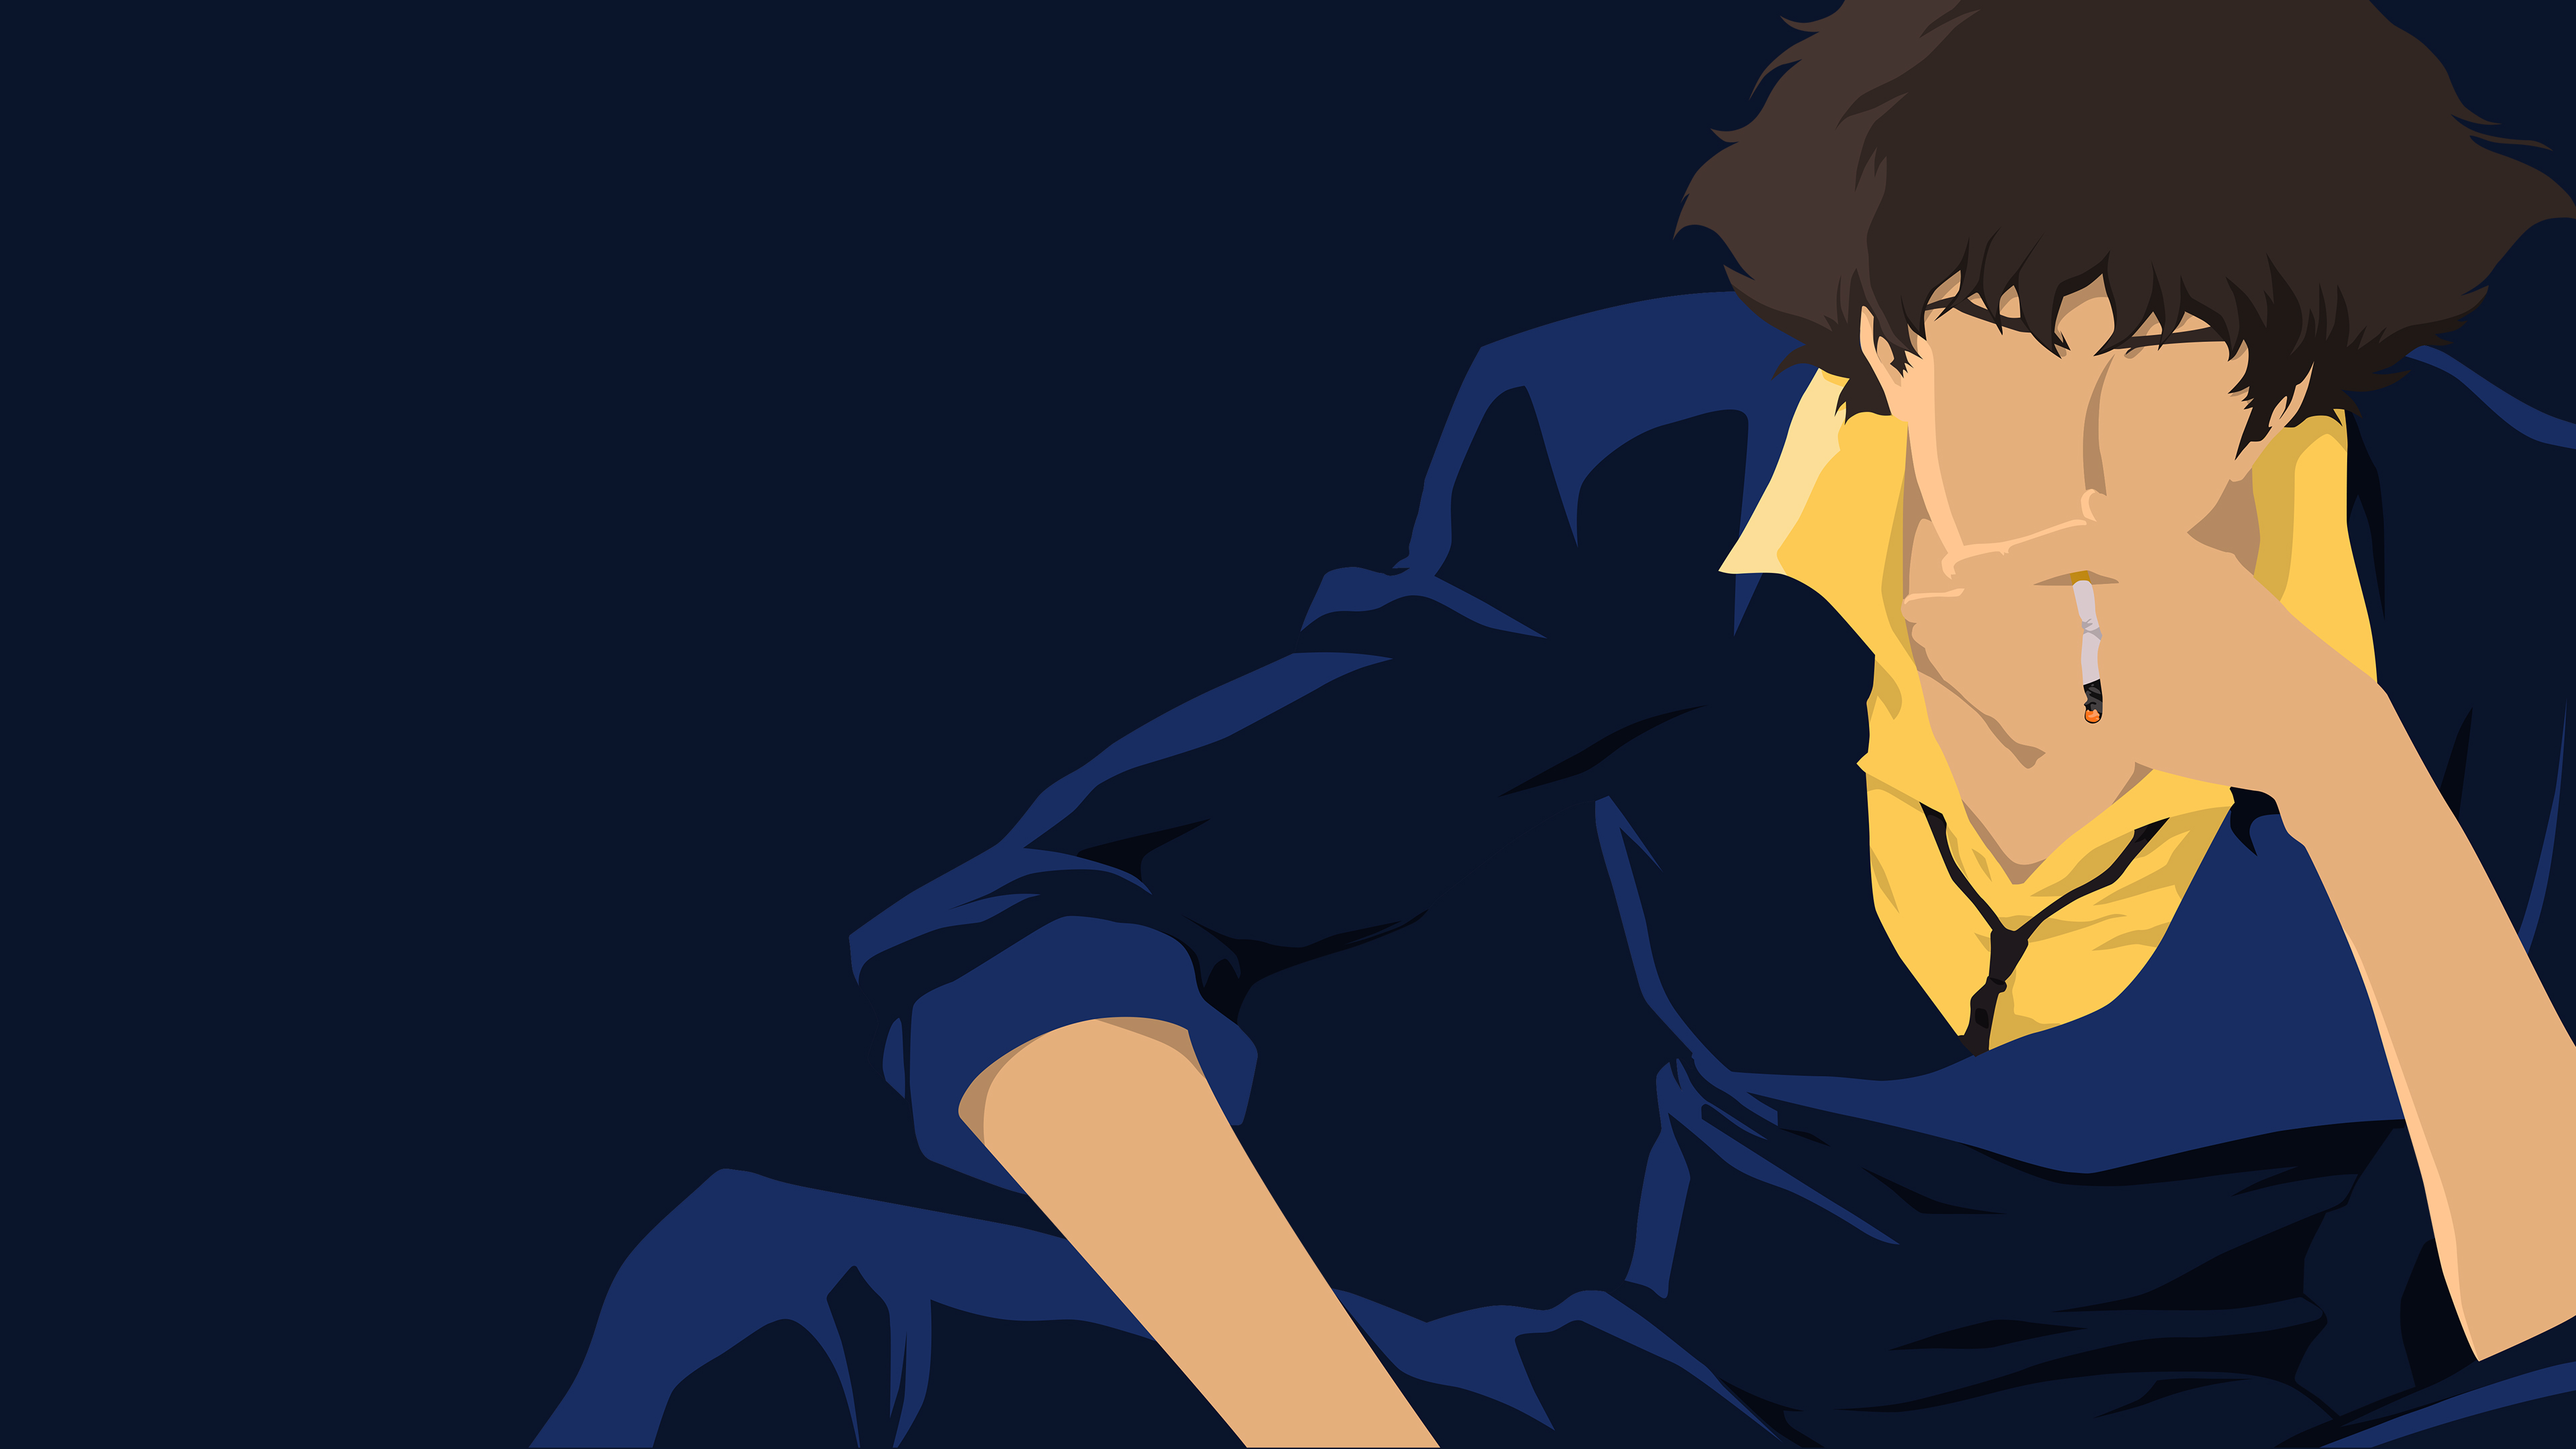 Spike Spiegel Minimalism 1280x1024 Resolution HD 4k Wallpaper, Image, Background, Photo and Picture